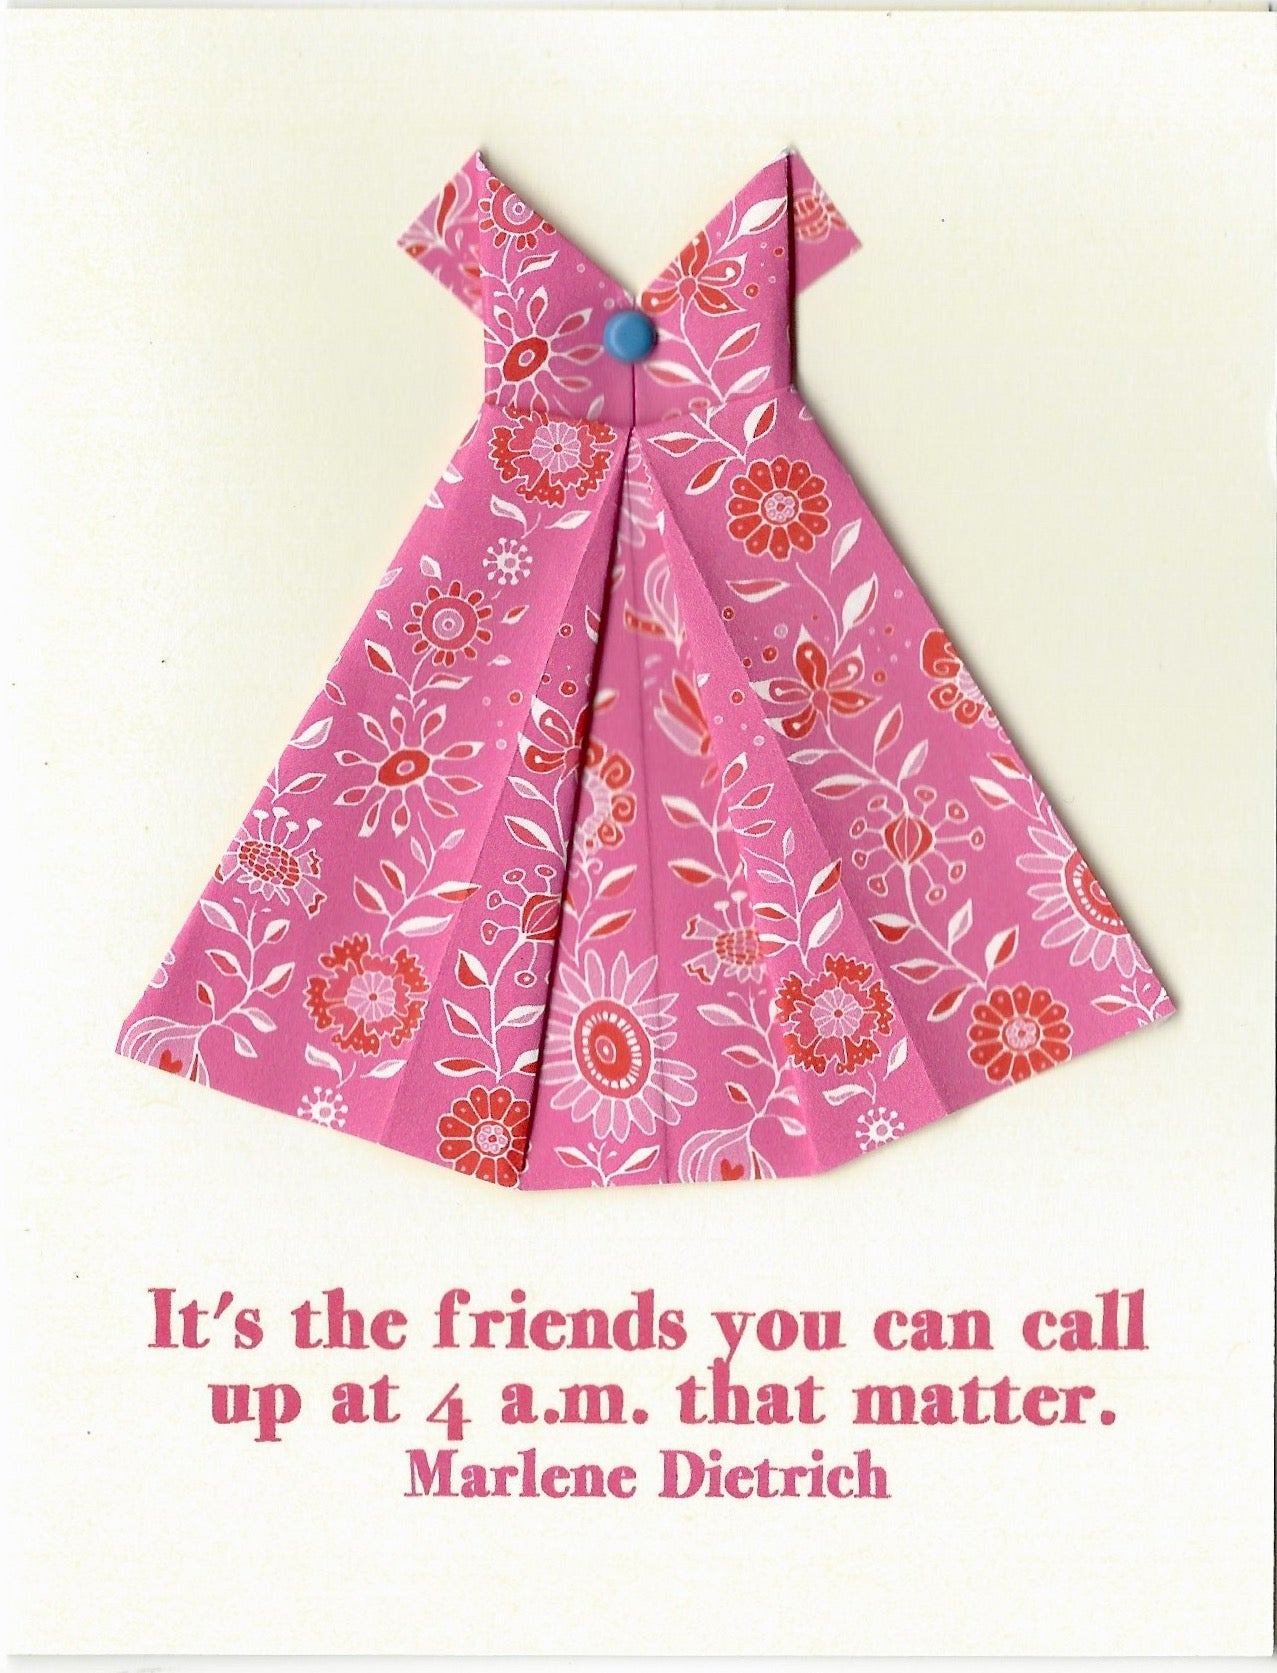 It's a friend that you can call ... friendship notecard Virginia Fitzgerald